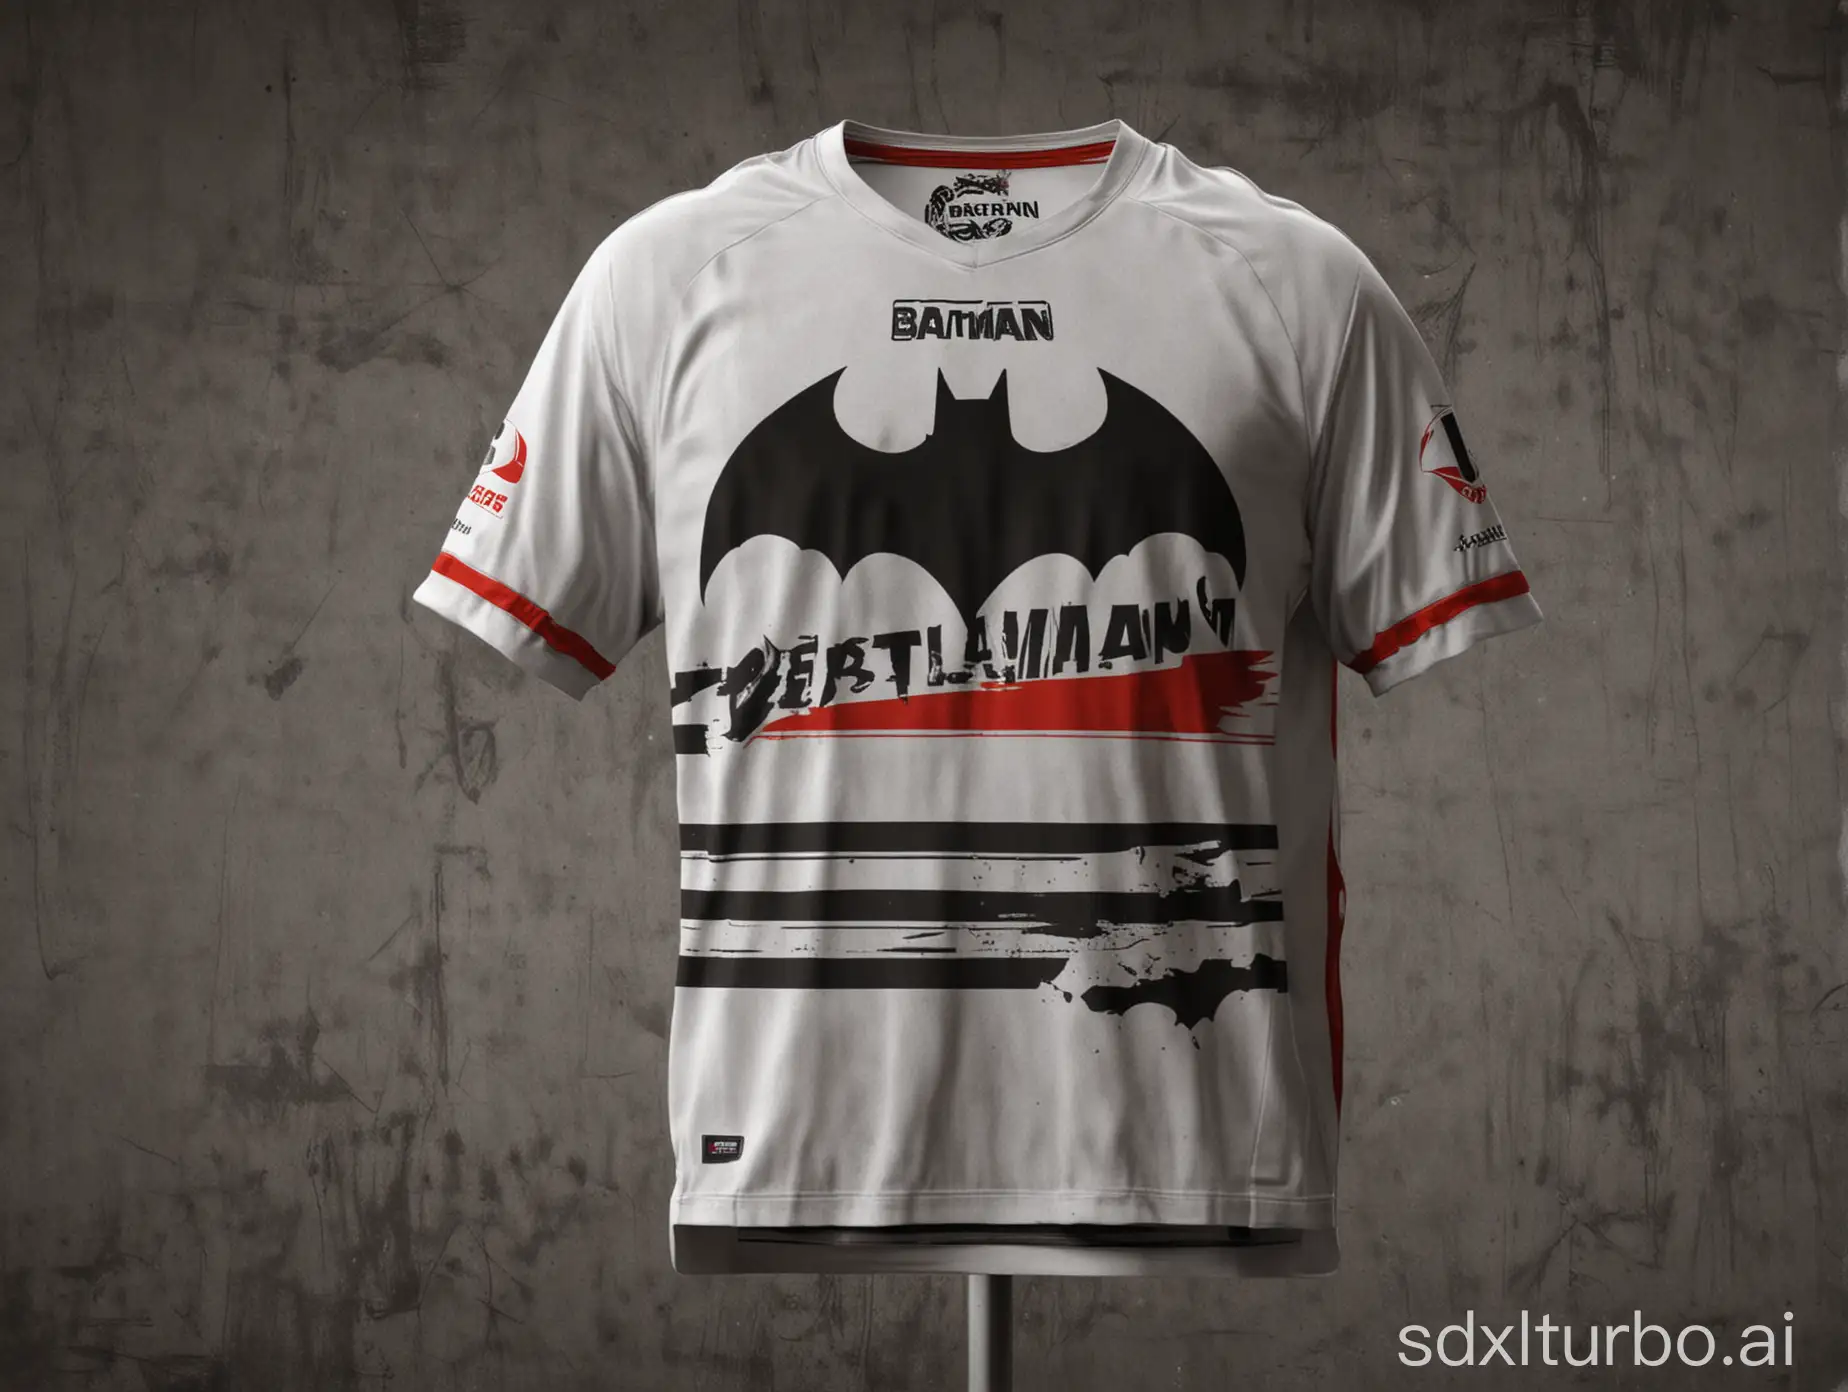 Have me make a jersey with the Batman Petrolspor logo, and have a stadium with a red and white flag on the back image, and the stadium's name should be Batman Stadium.